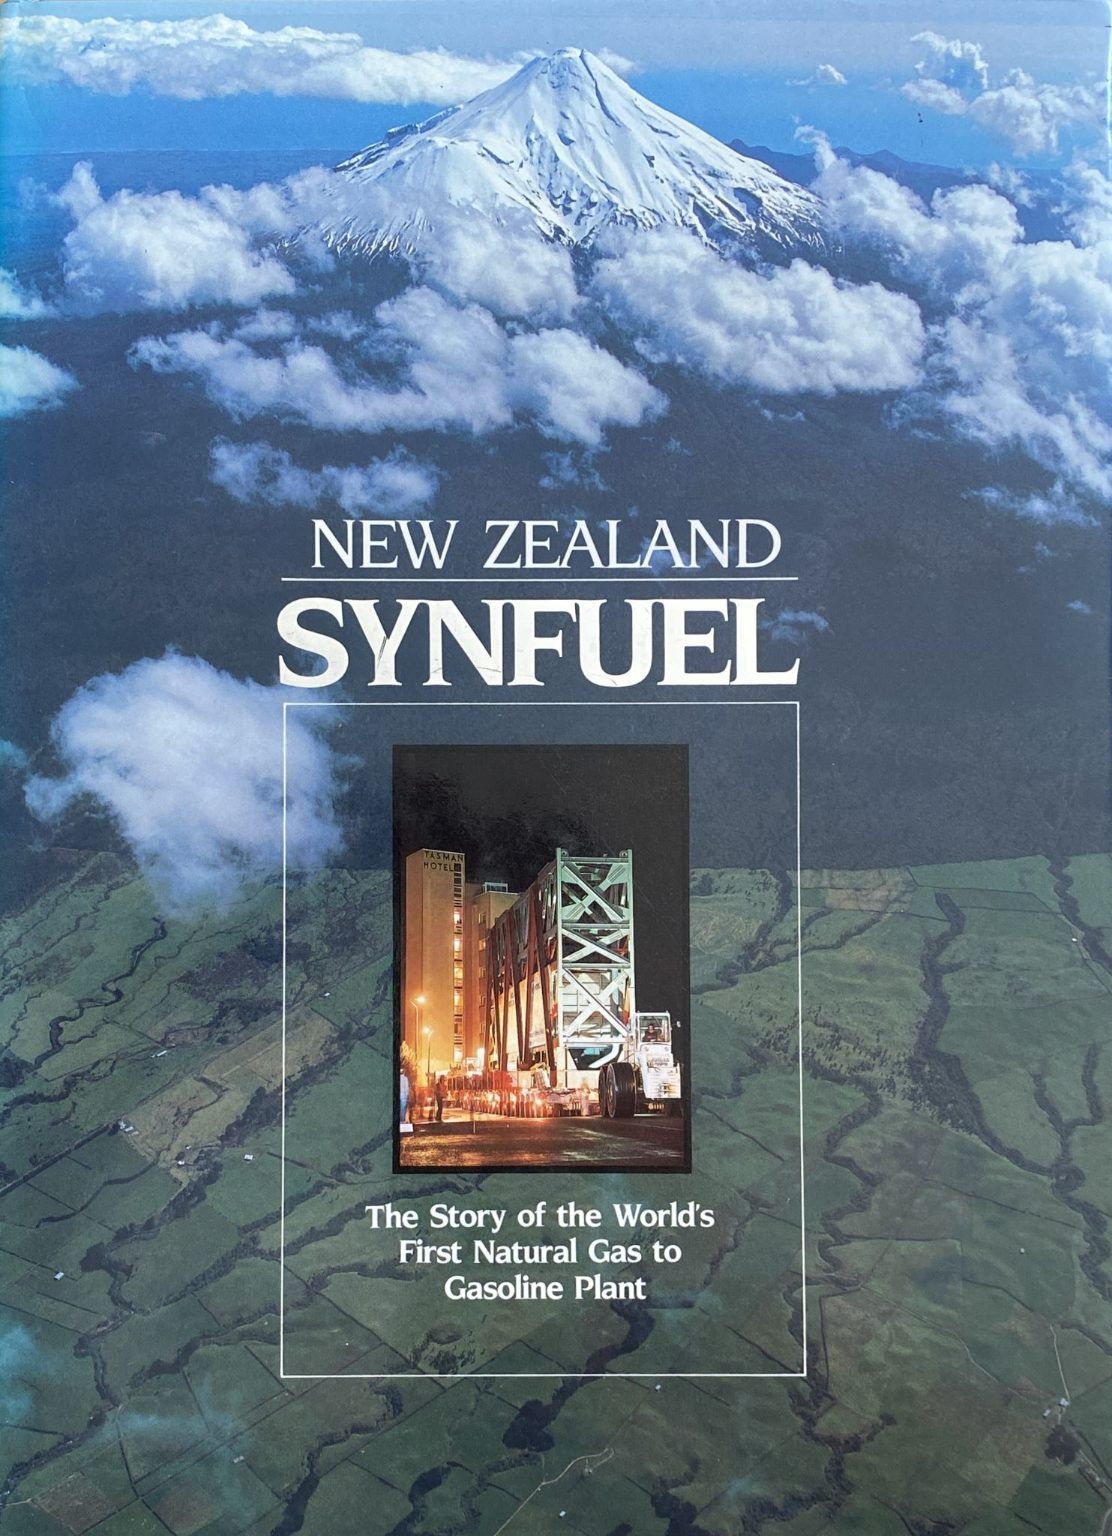 NEW ZEALAND SYNFUEL: The World's First Natural Gas to Gasoline Plant